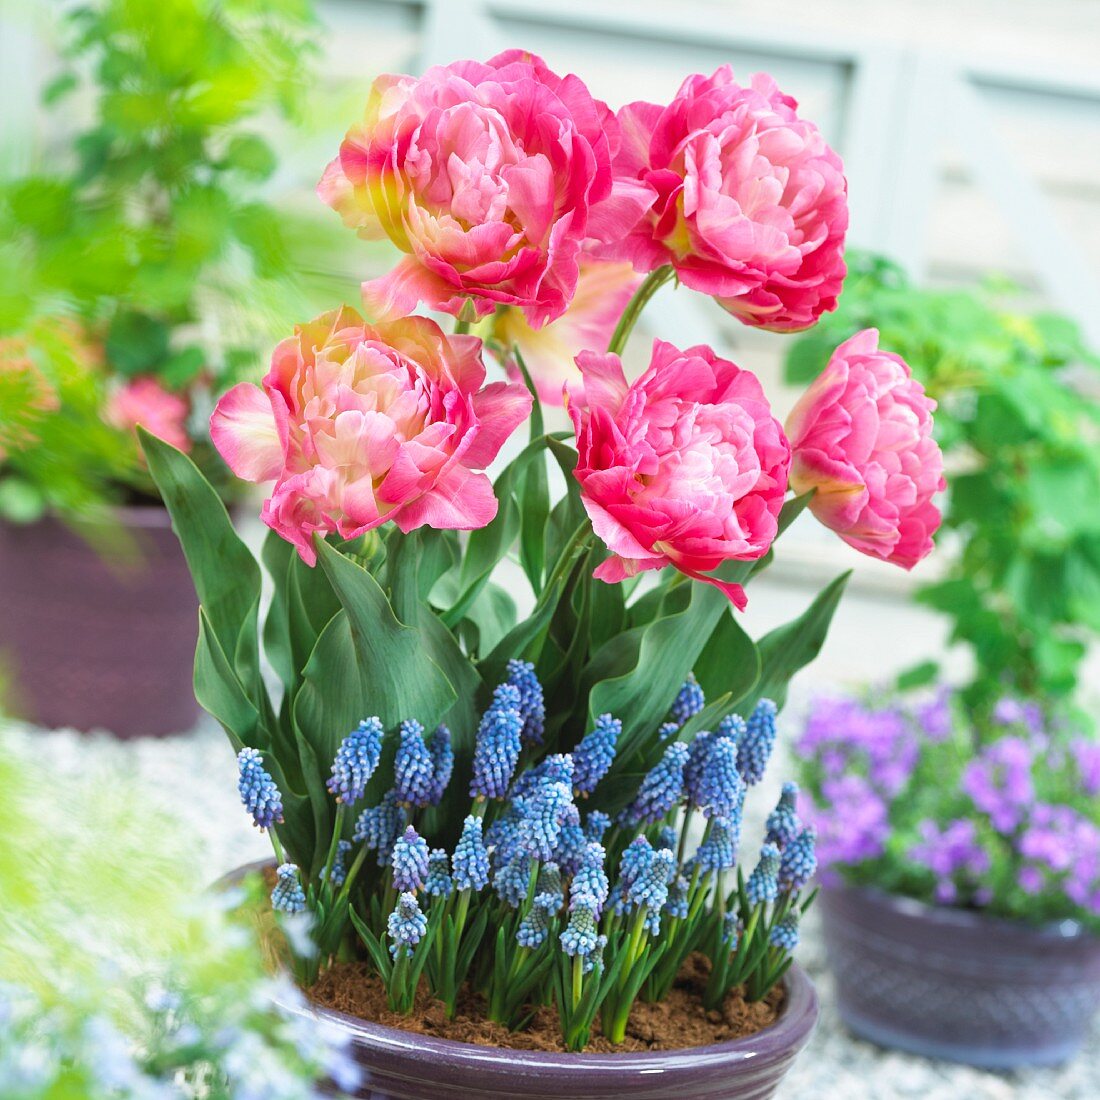 Pink tulips and grape hyacinths in a plant pot